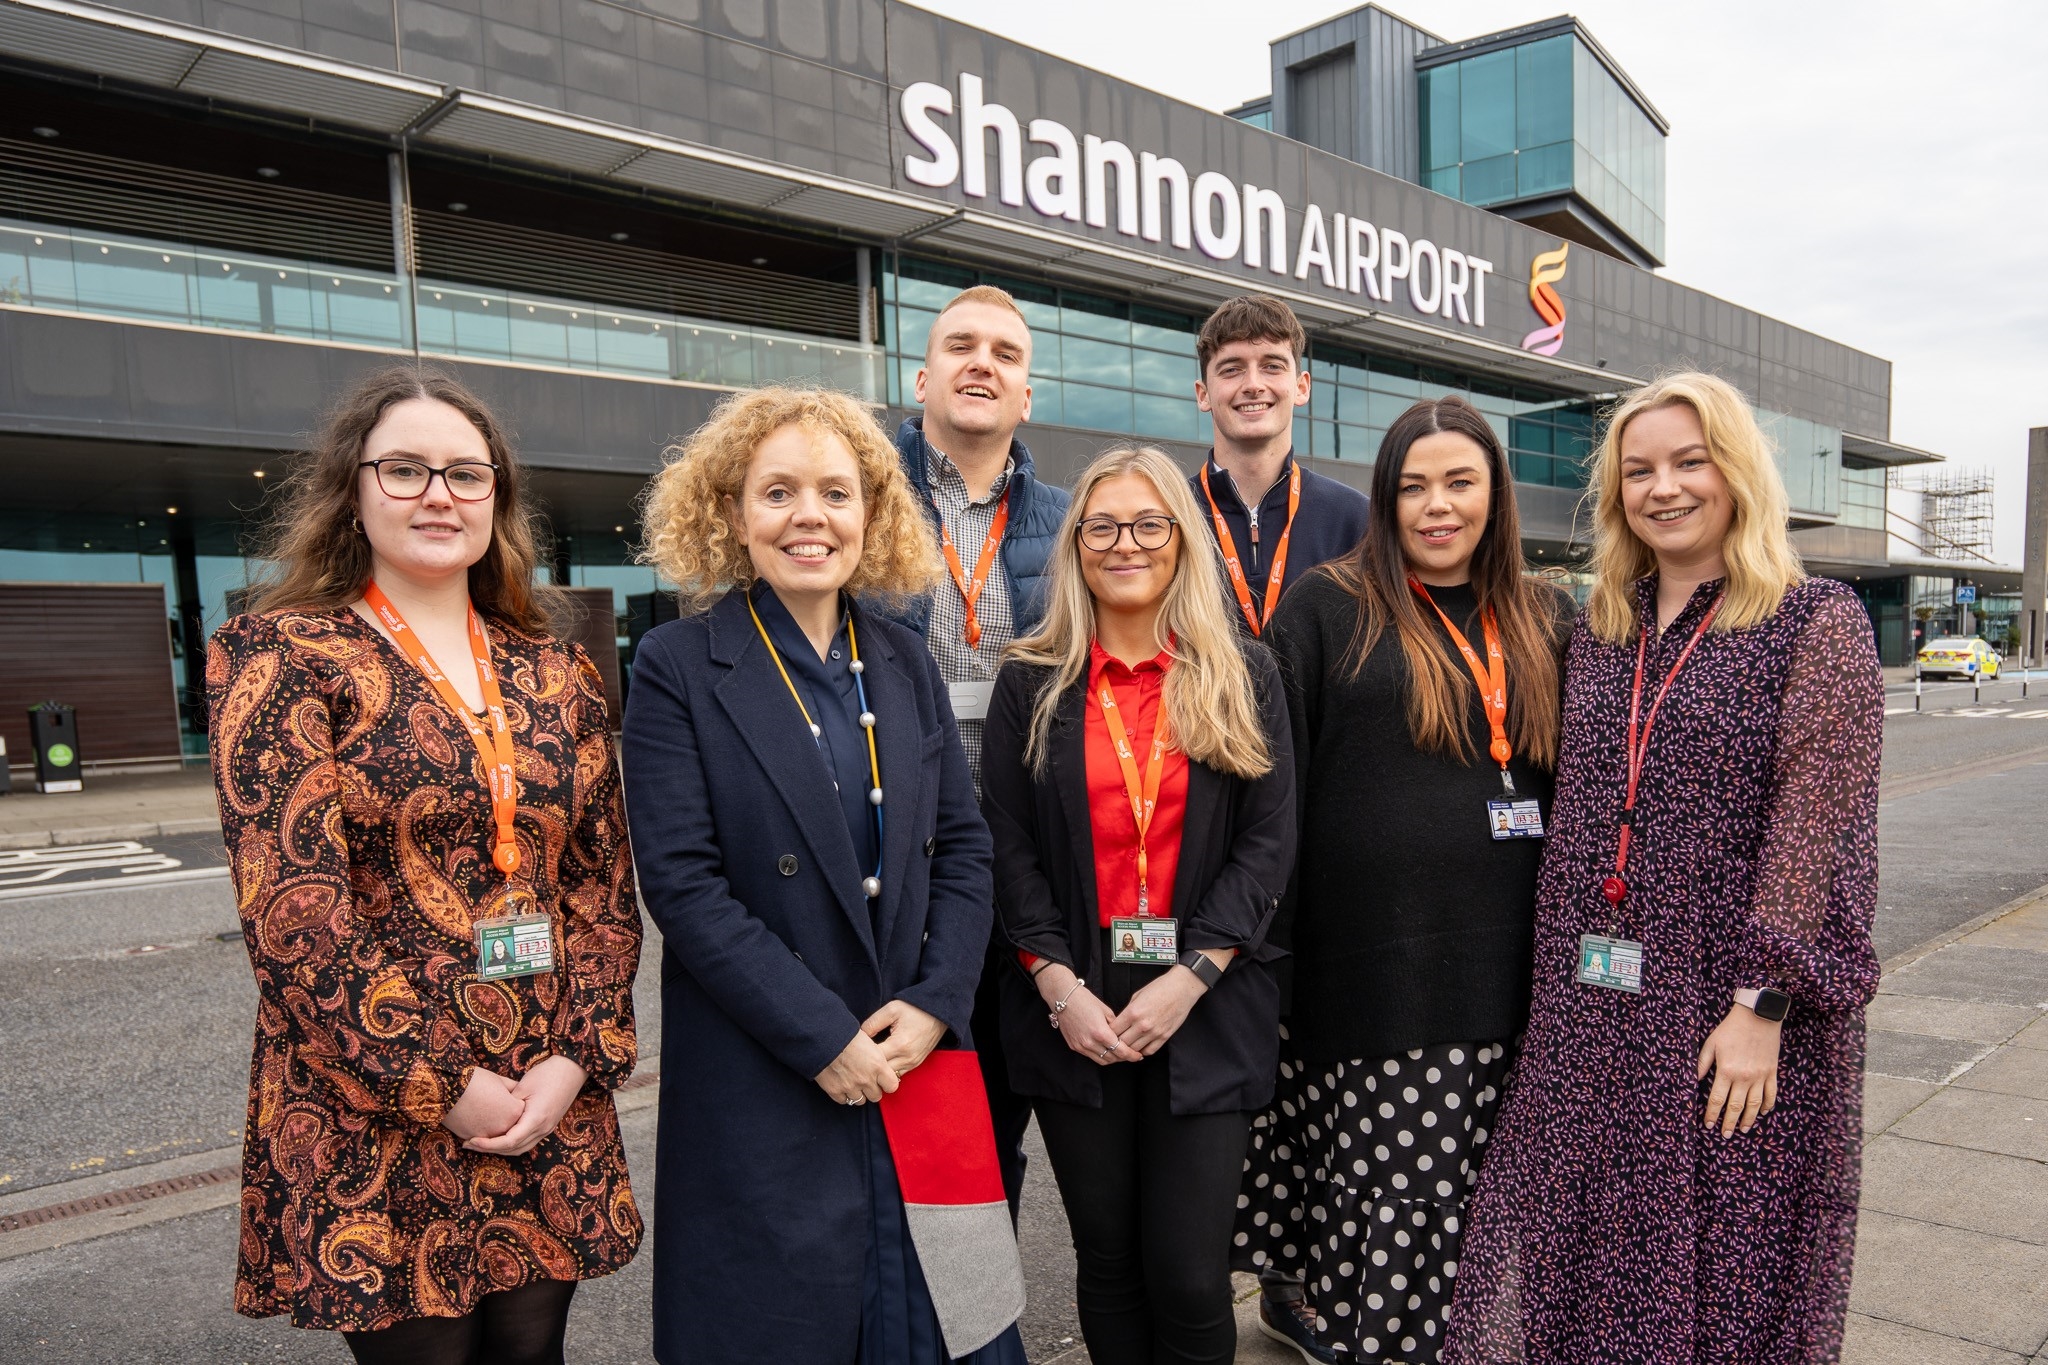 The Shannon Airport Group unveils the names of the two chosen charities they will fundraise for over the next 12 months charities